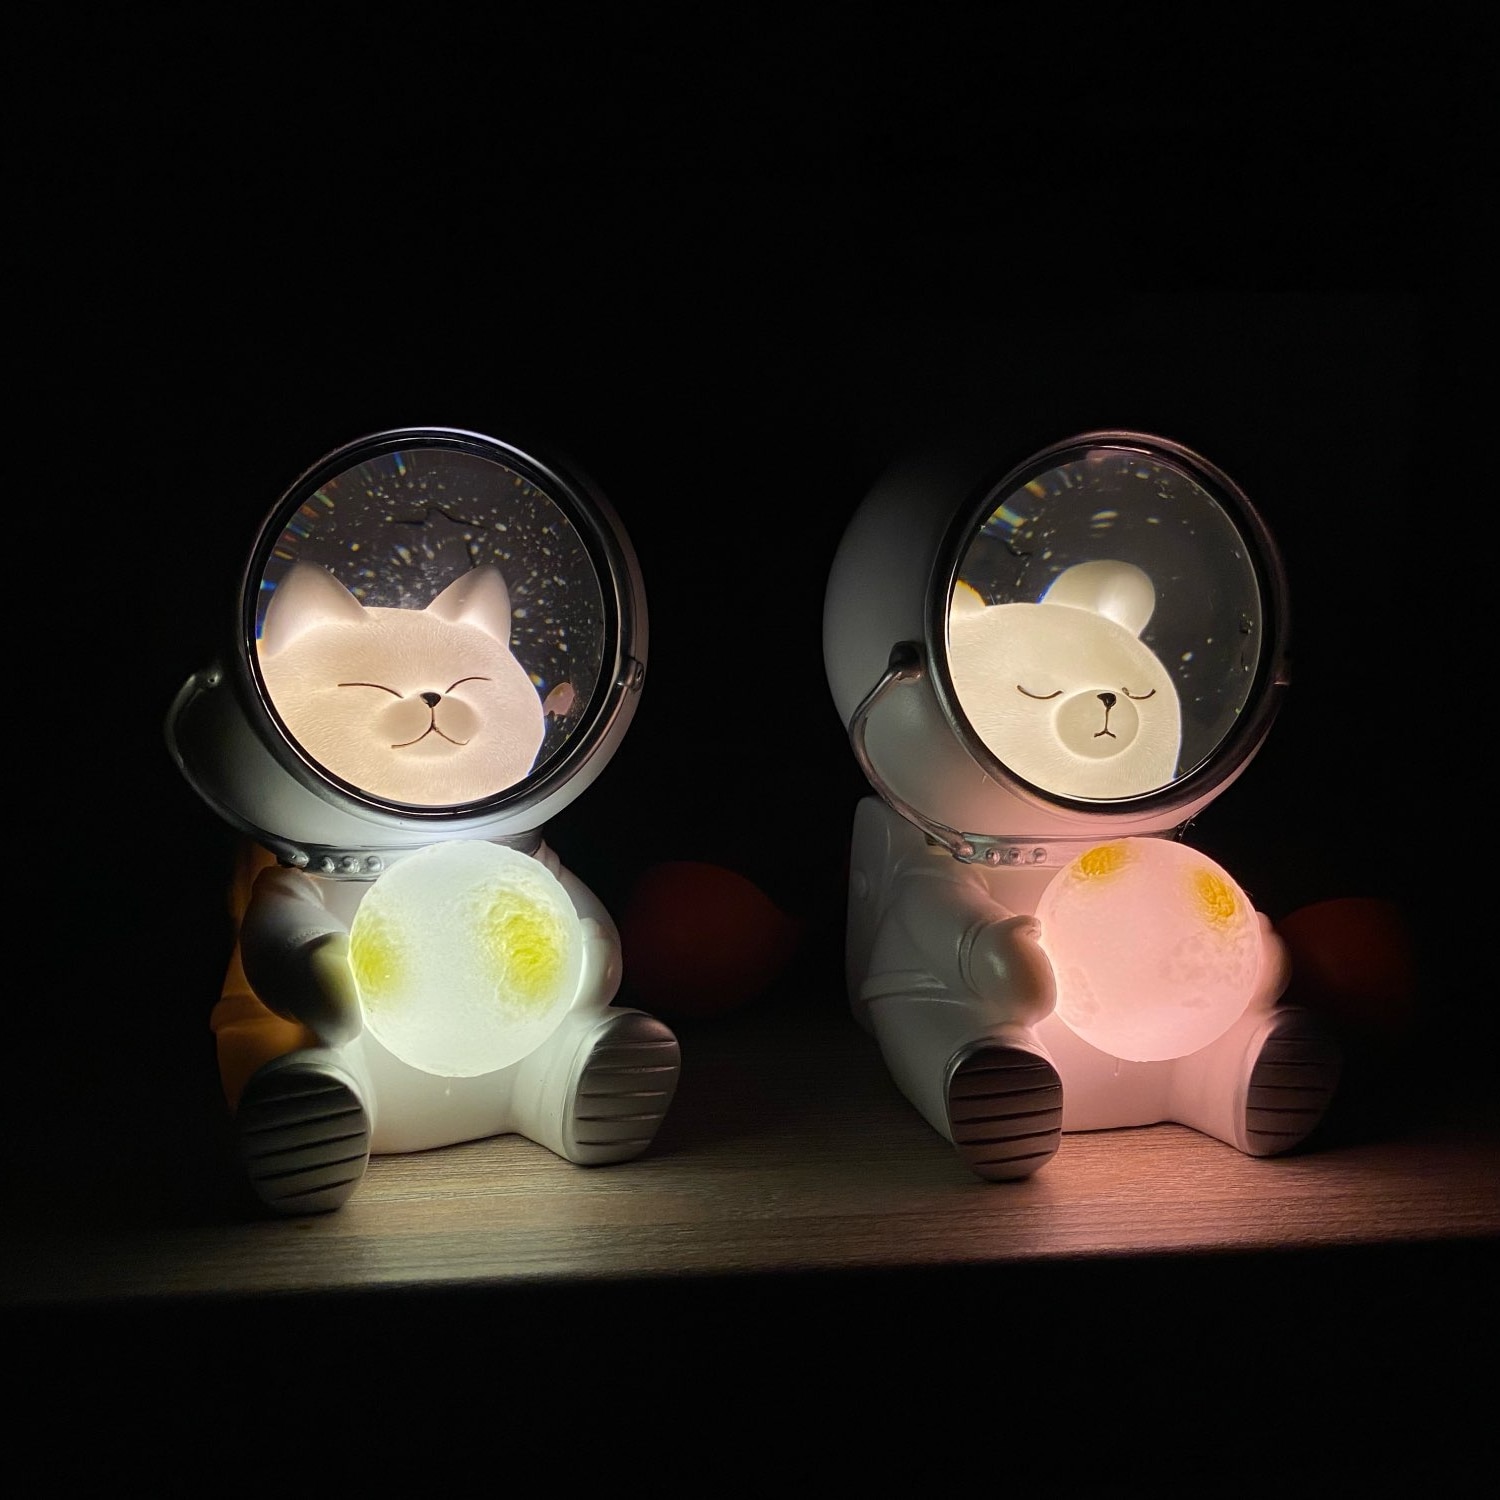 Cute Astronaut Pets in Space Suit Themed Night Lamps (3 Designs) Lamps